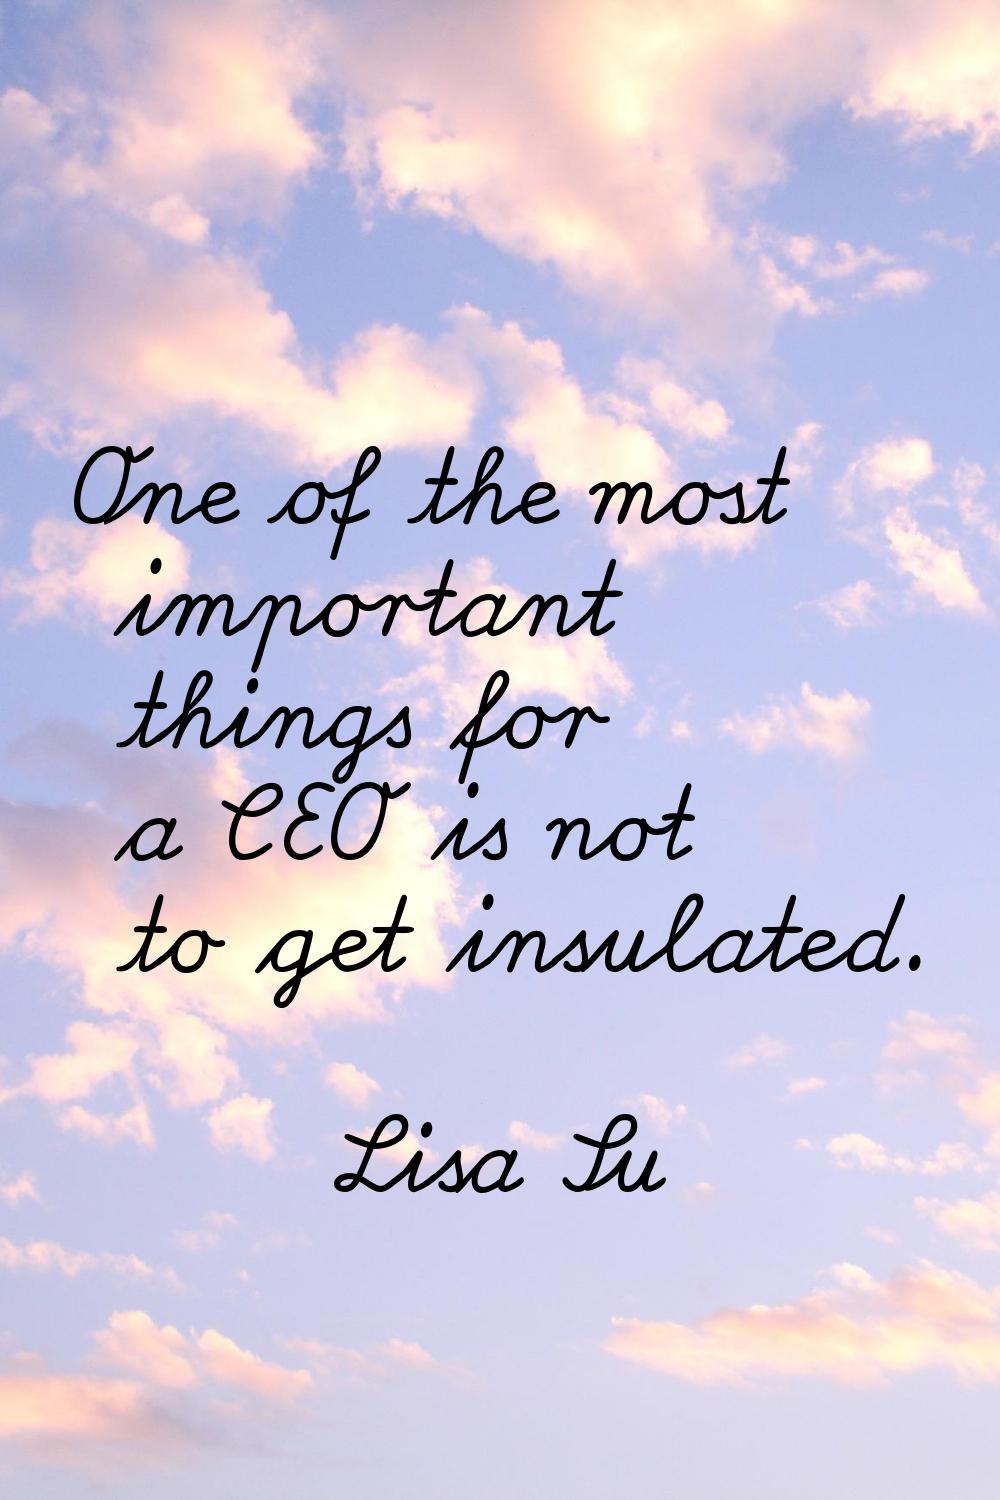 One of the most important things for a CEO is not to get insulated.